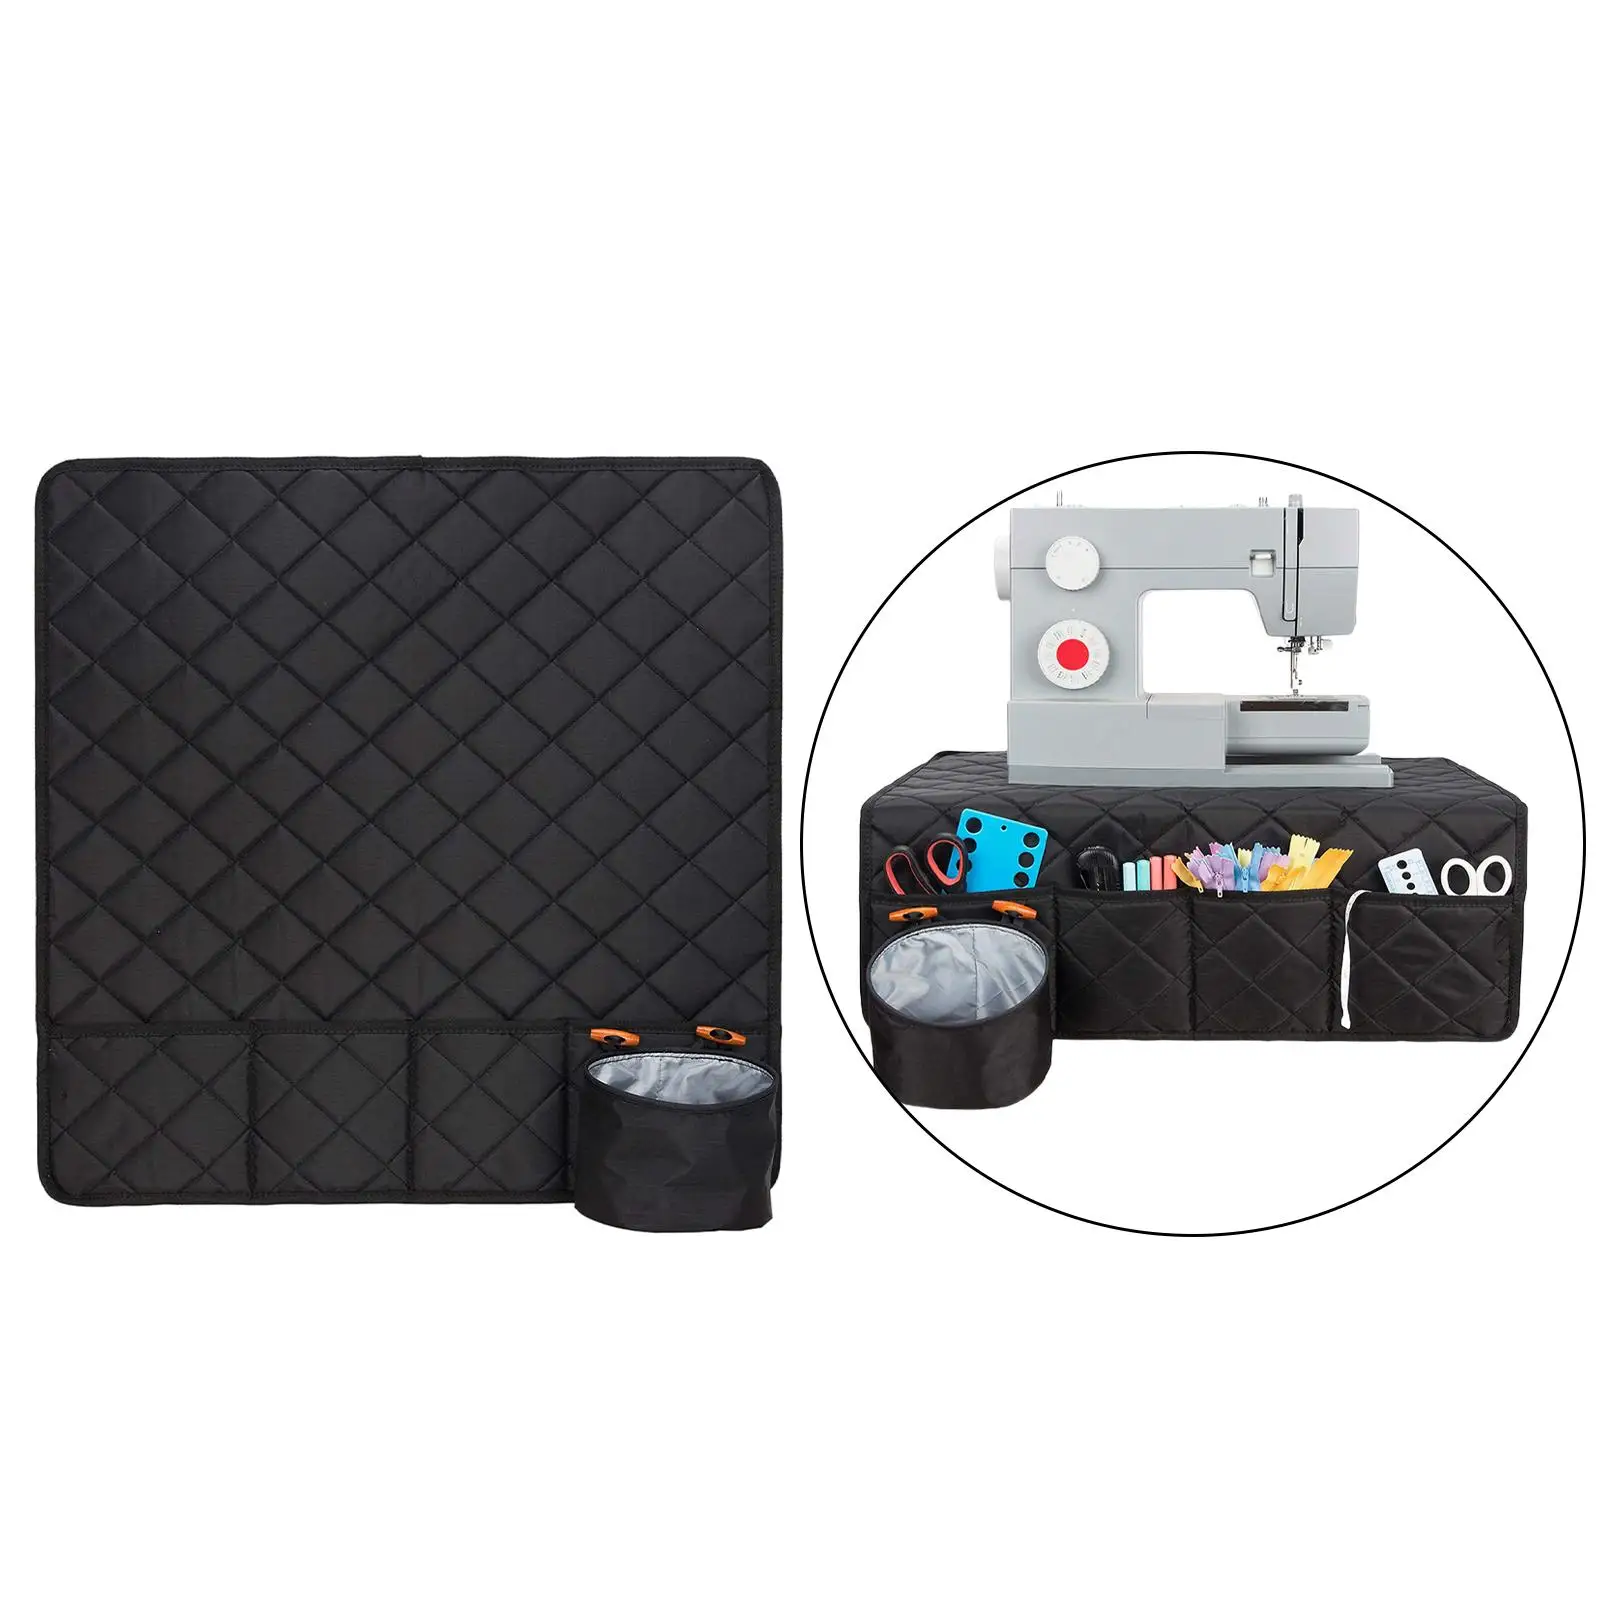 Sewing Machine Pad with Multiple Pockets Water-Resistant Sewing Machine Mat